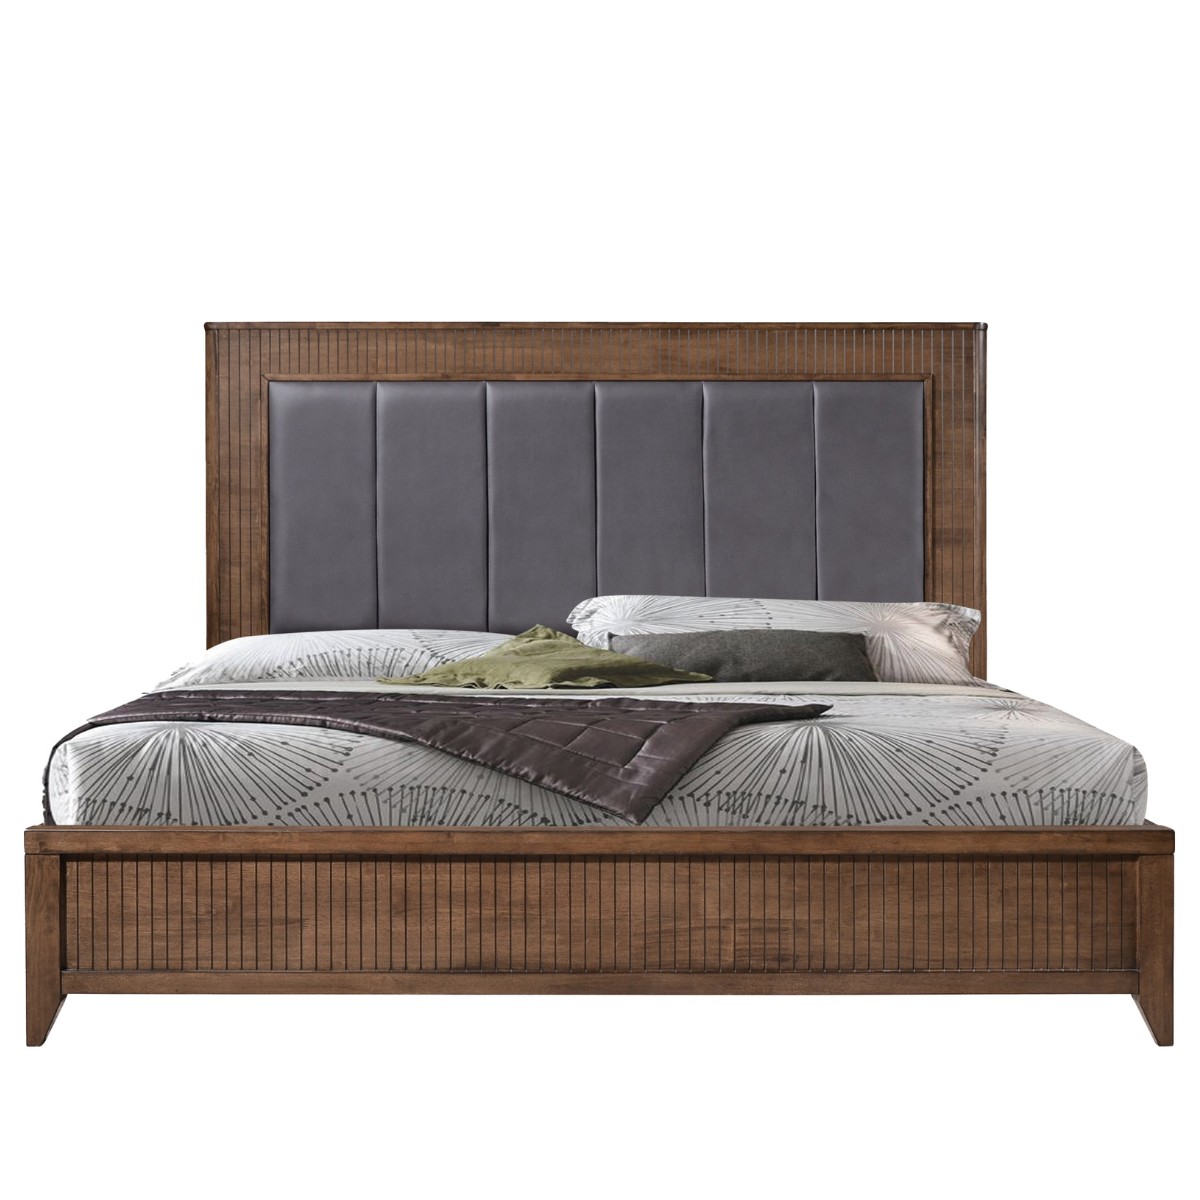 Ventura Wooden Bed with Upholstered Headboard